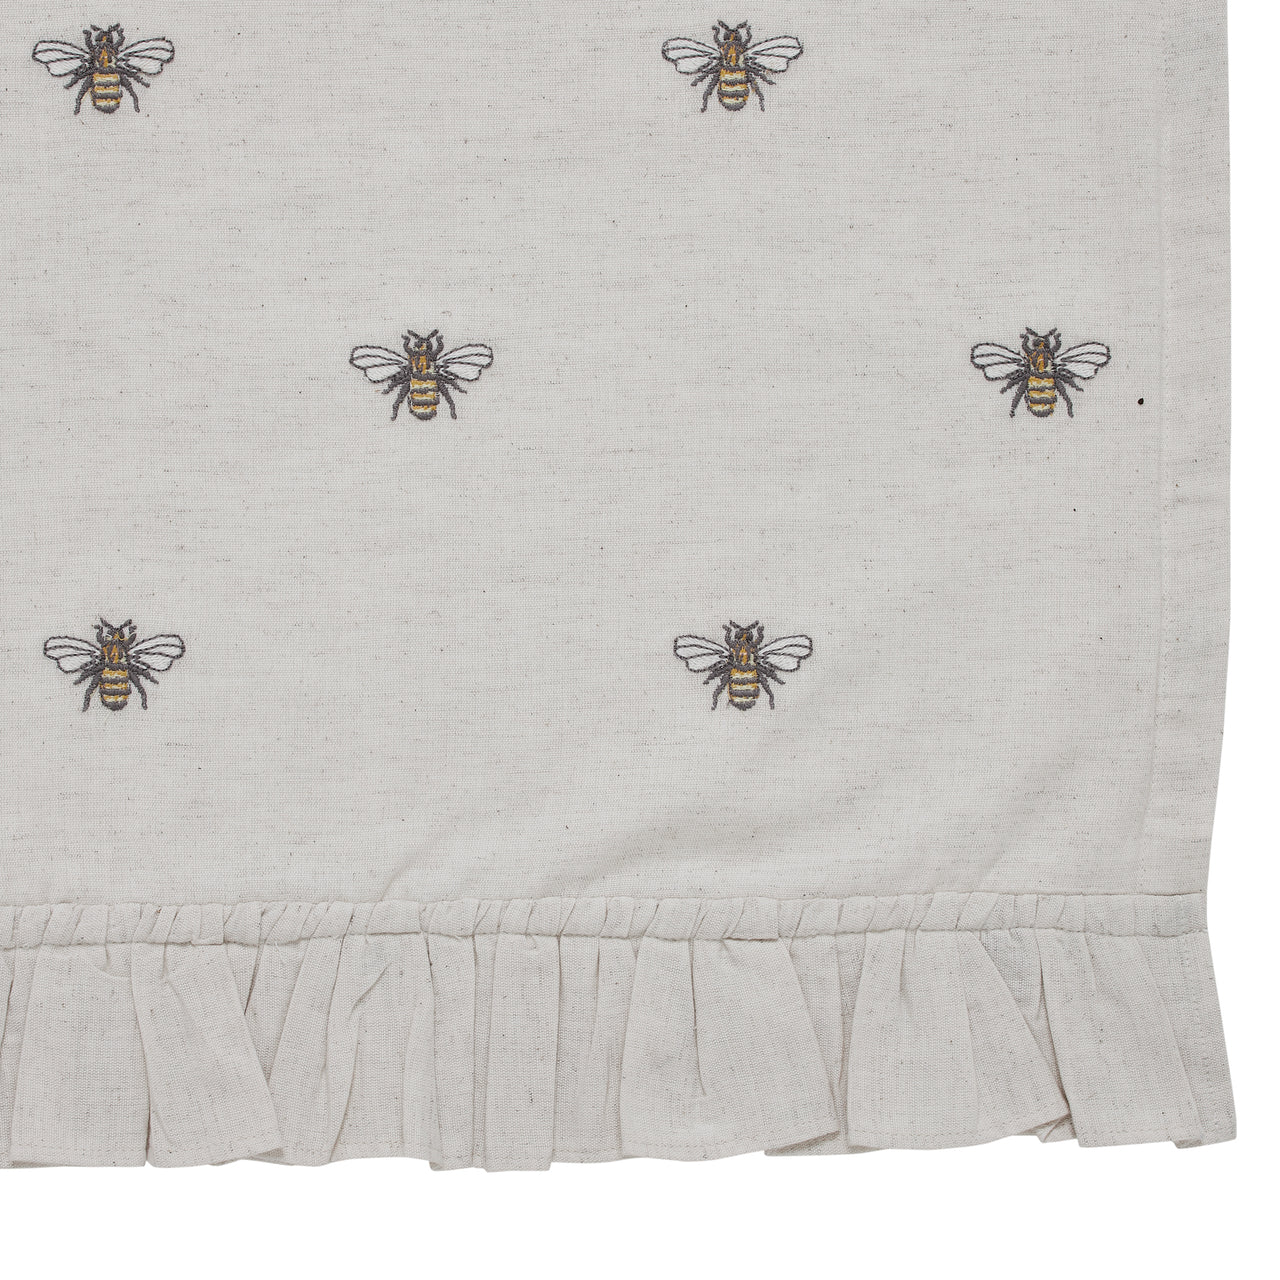 Embroidered Bee Valance Curtain 16"x90" VHC Brands